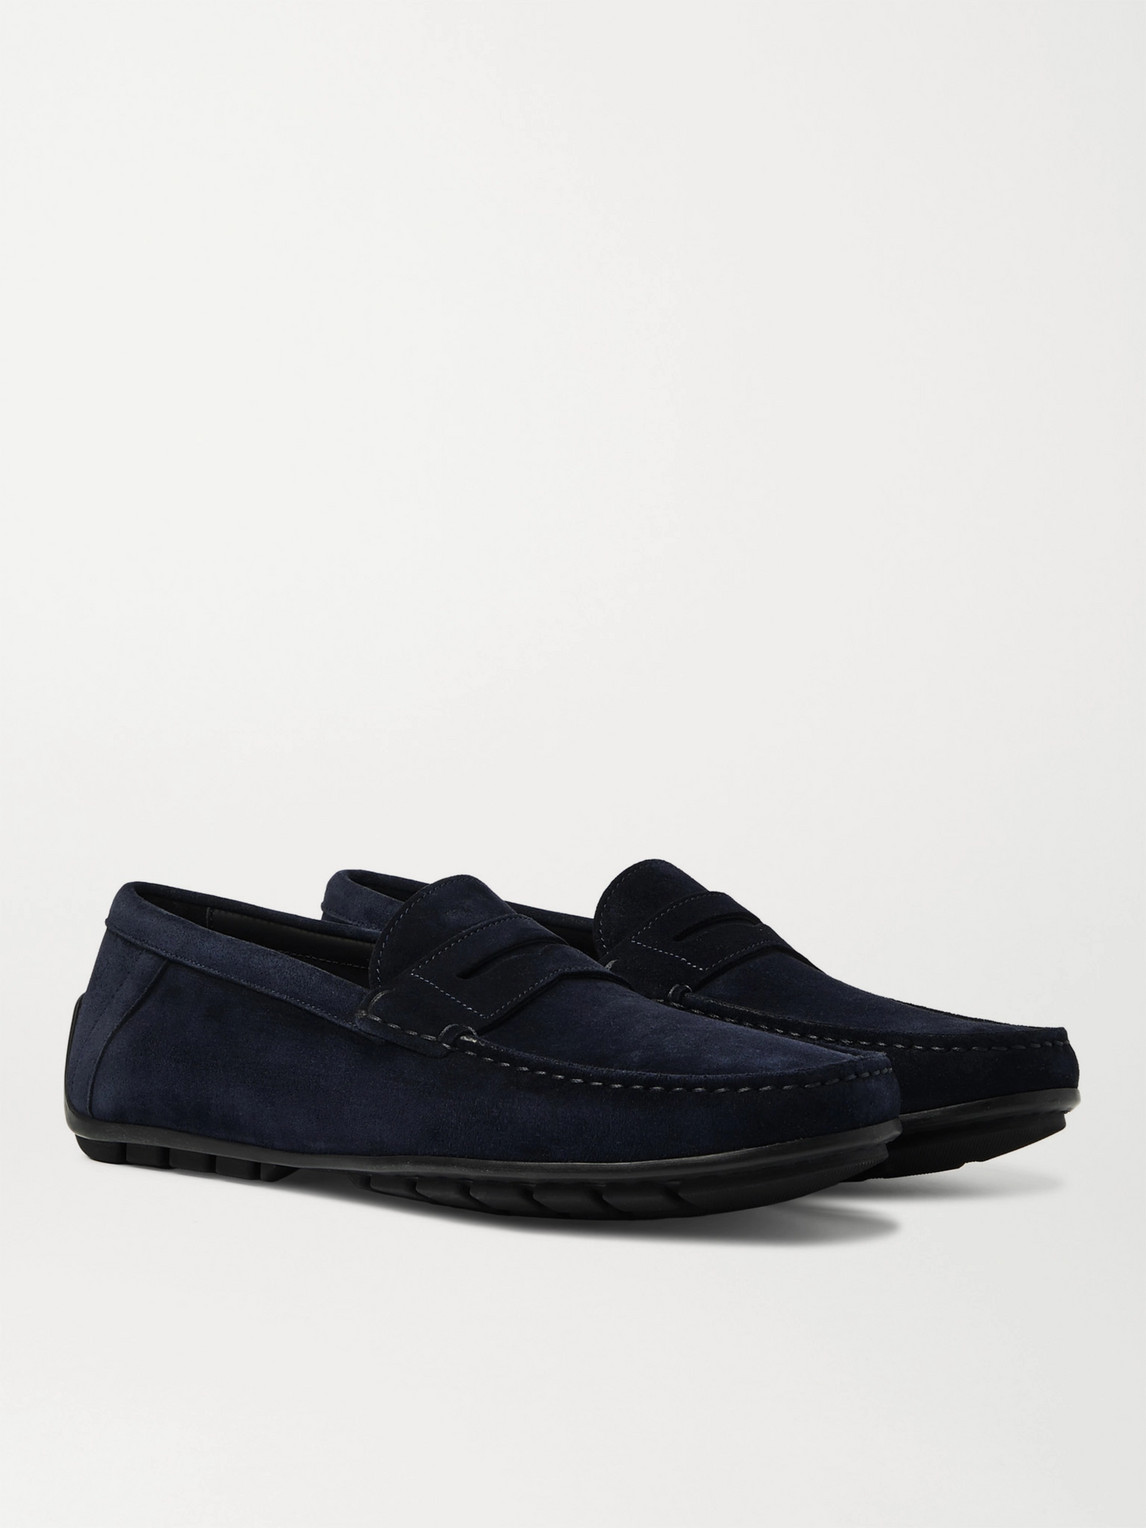 blue suede driving shoes